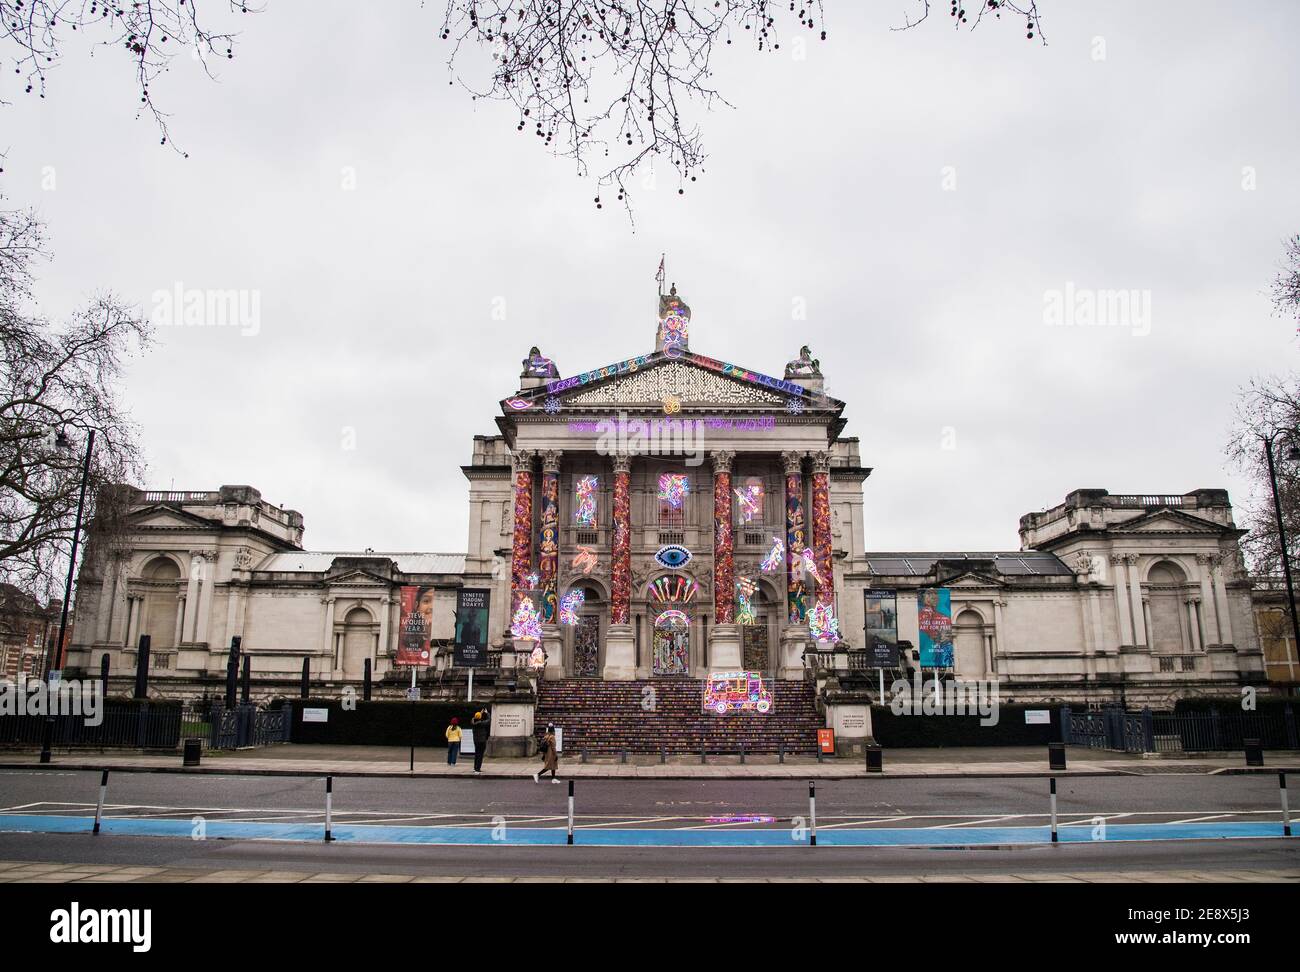 'Remembering a Brave New World' by Chila Kumari Singh Burman, outside Tate Britain in London during England's third national lockdown to curb the spread of coronavirus. Picture date: Monday February 1, 2021. Stock Photo